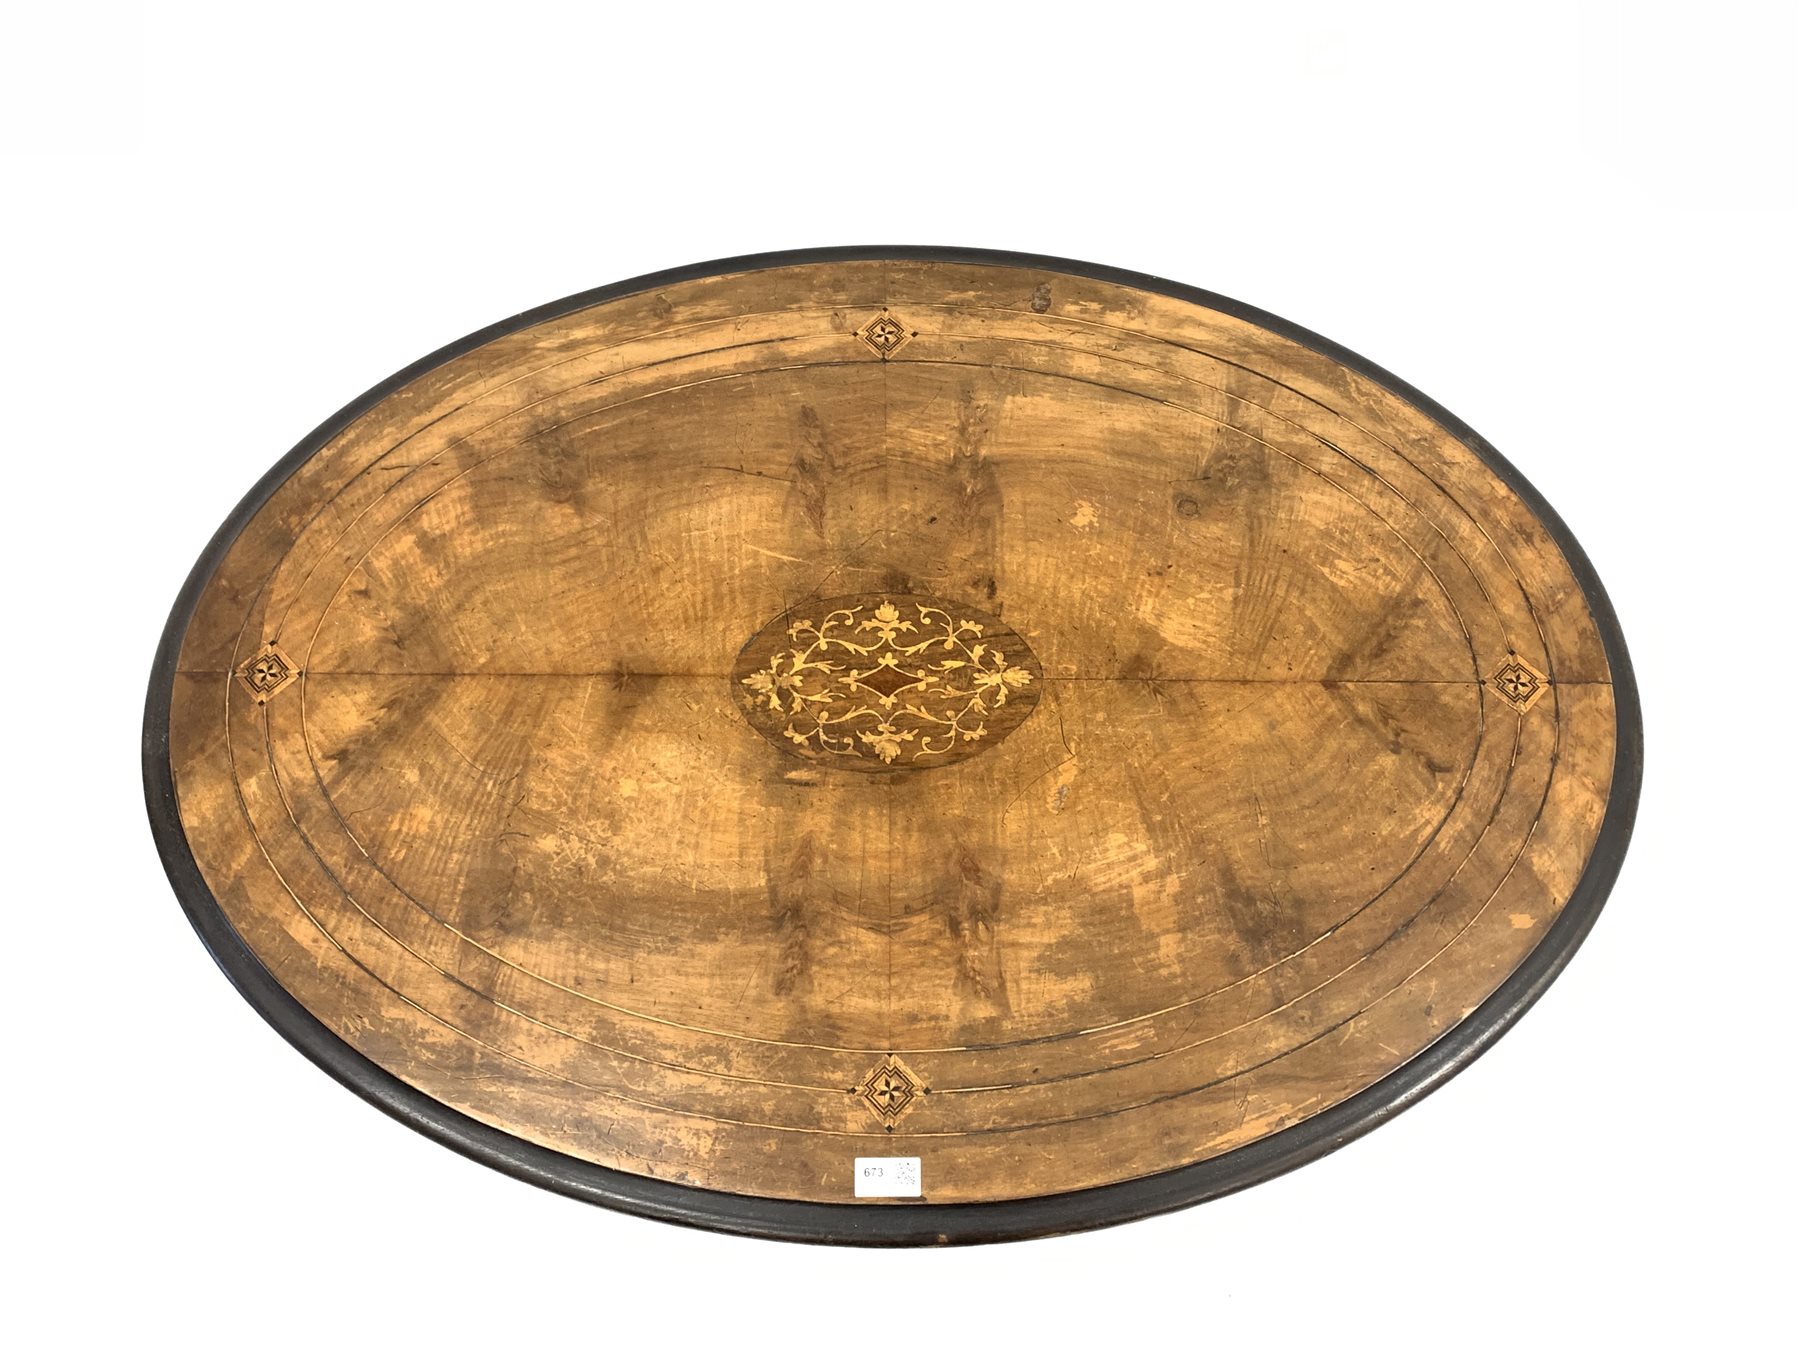 Victorian walnut oval centre table, floral inlaid marquetry to centre encircled by boxwood stringing - Image 3 of 4